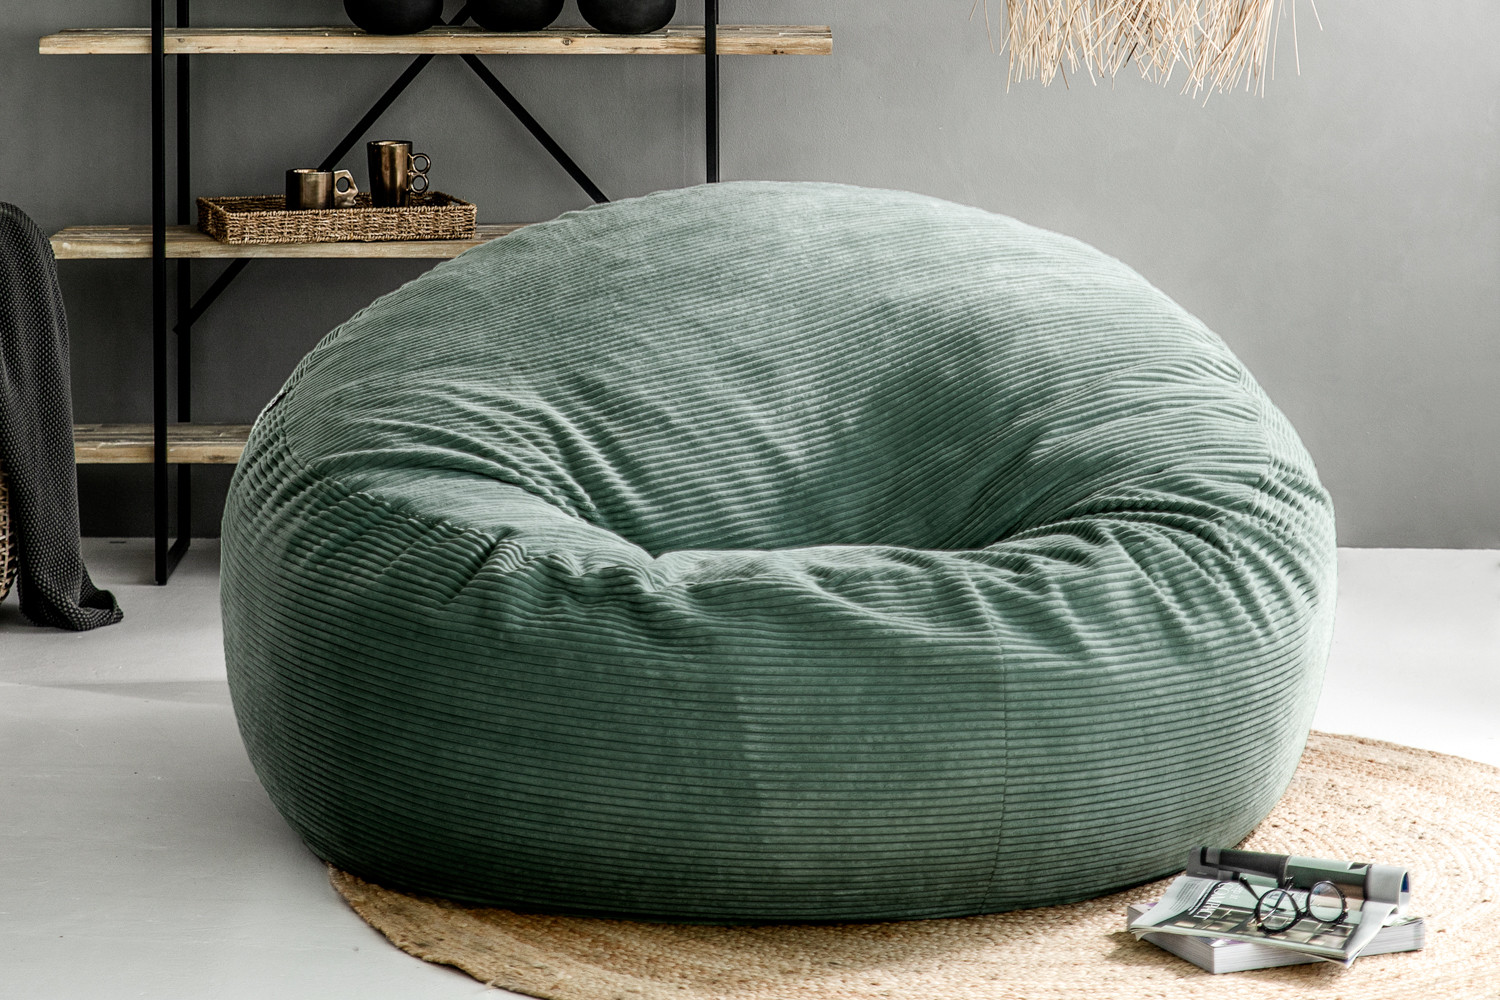 21 Best Beanbag Chairs: Leather, Faux Fur, and More | Architectural Digest